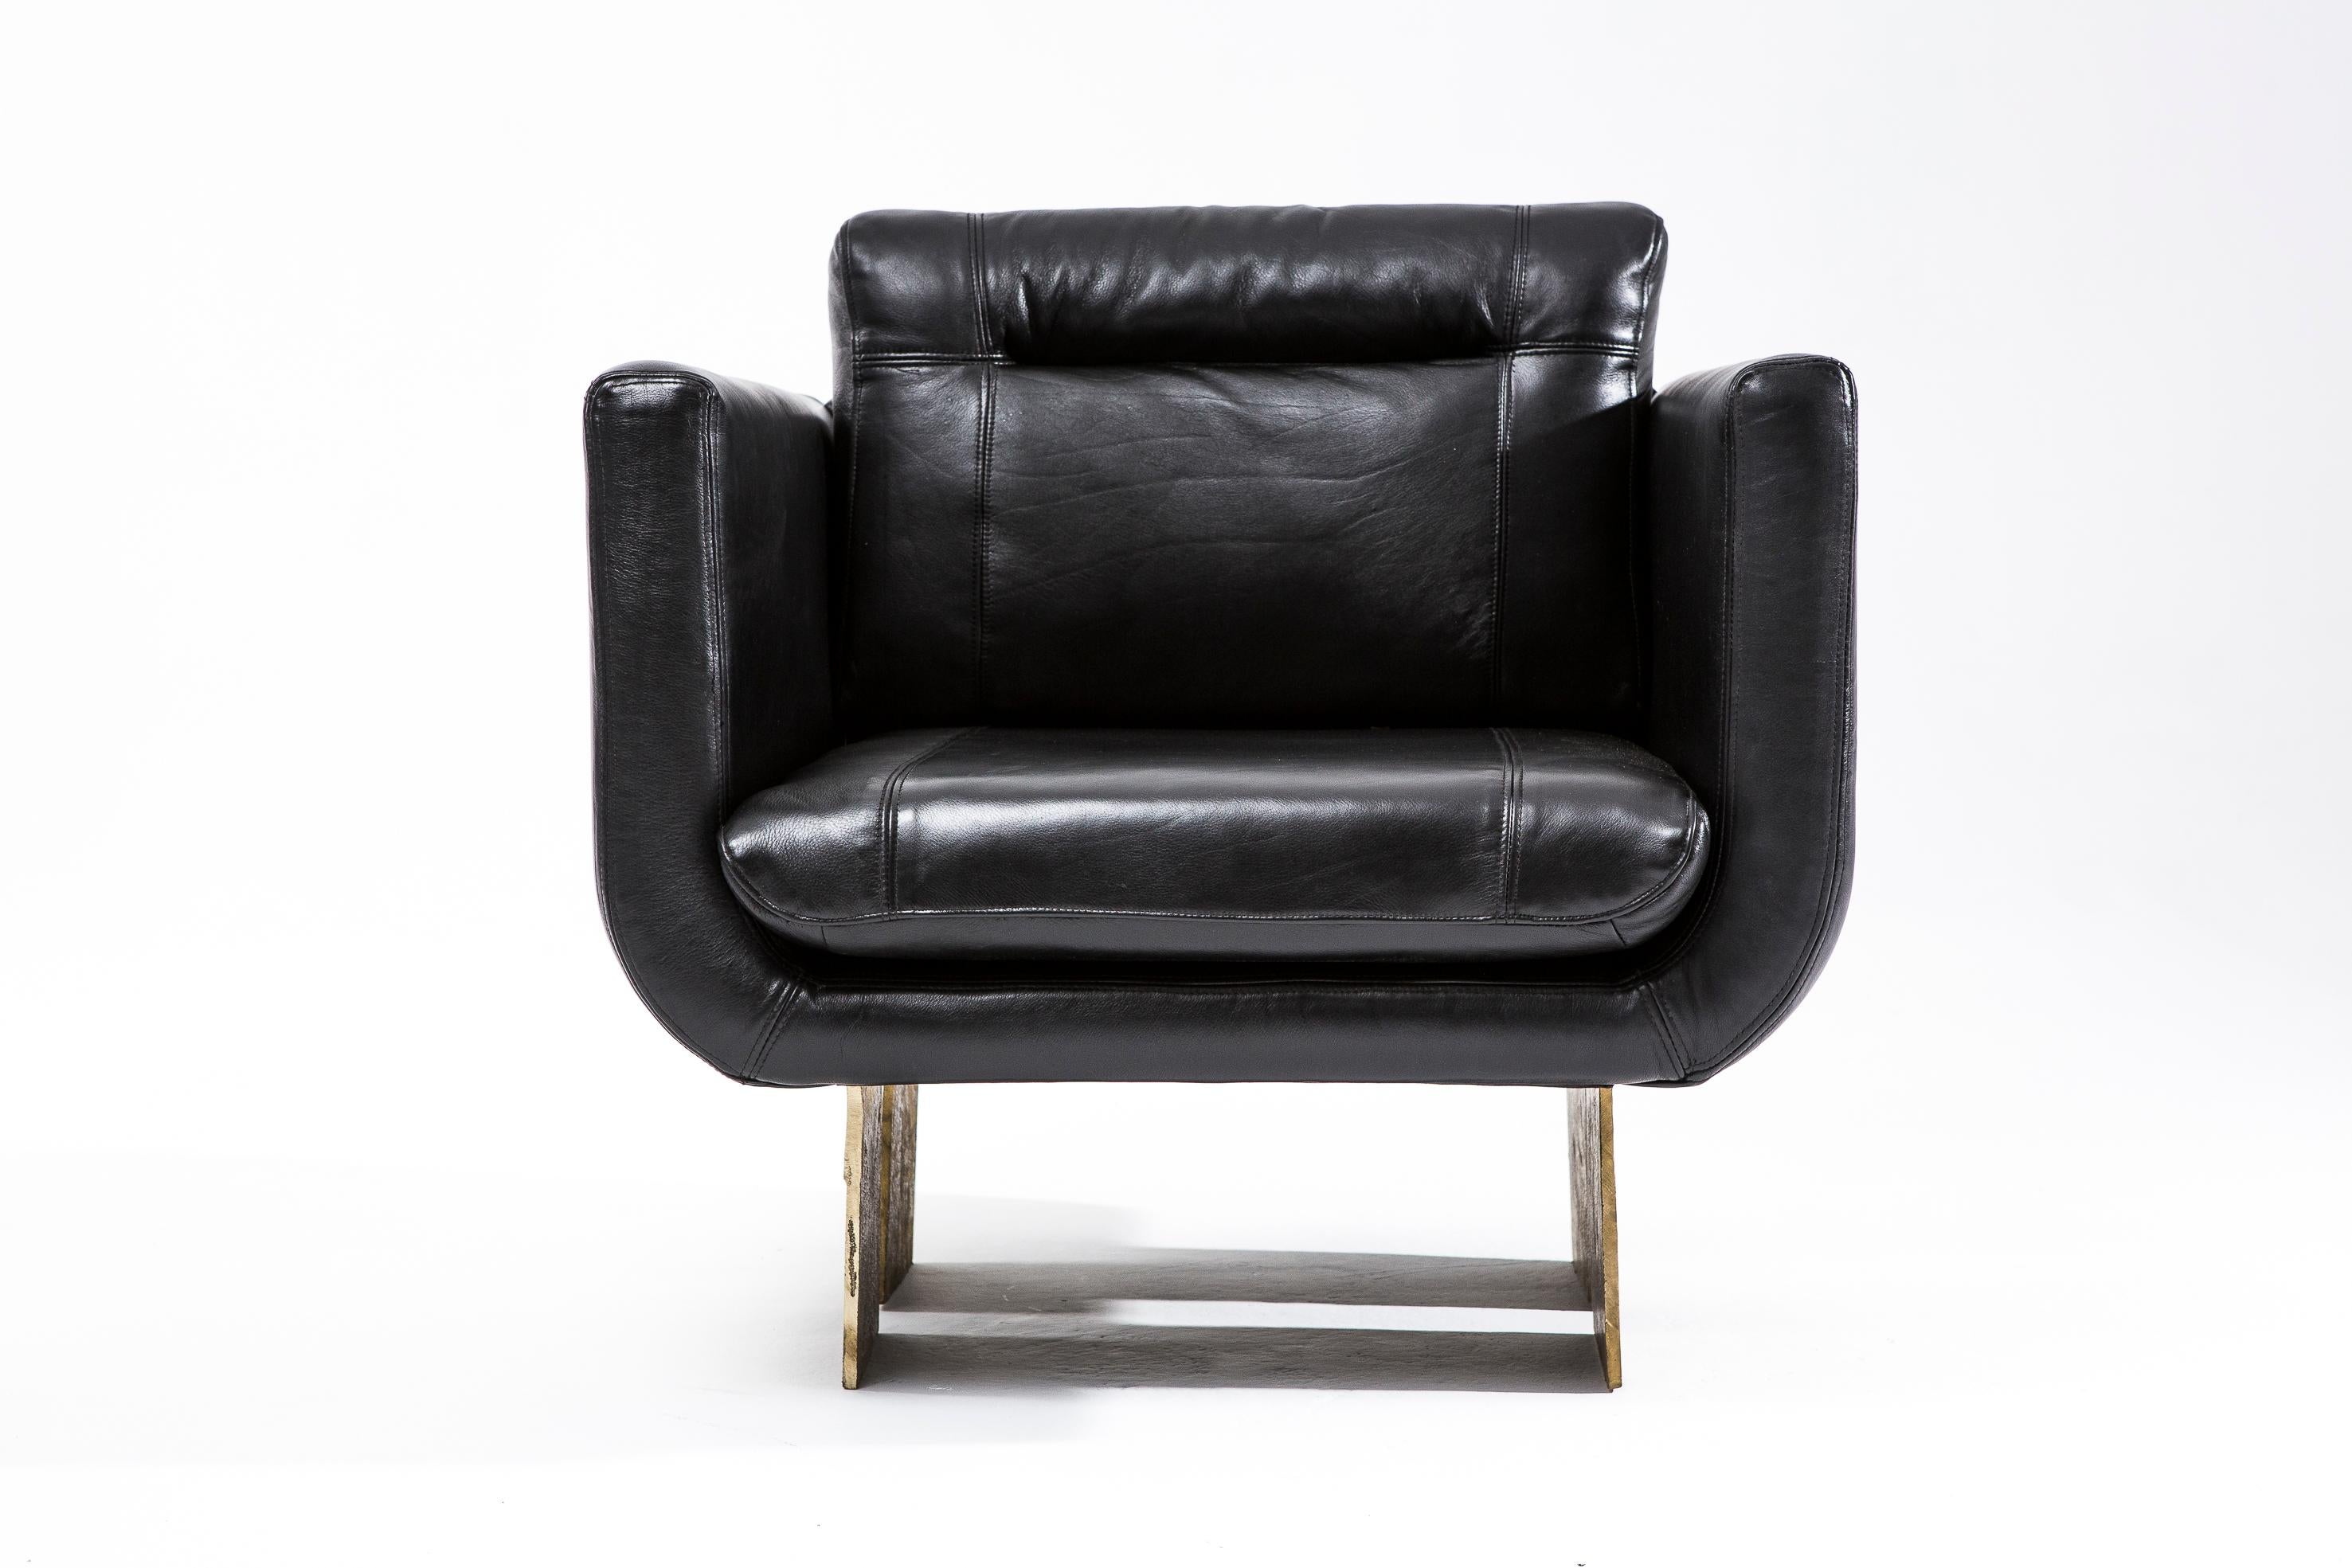 Primal Lounge Chair by Egg Designs
Dimensions: 80 L X 80 W X 80 H cm
Materials: Solid Cast Brass, Black Leather Upholstery

Founded by South Africans and life partners, Greg and Roche Dry - Egg is a unique perspective in contemporary furniture